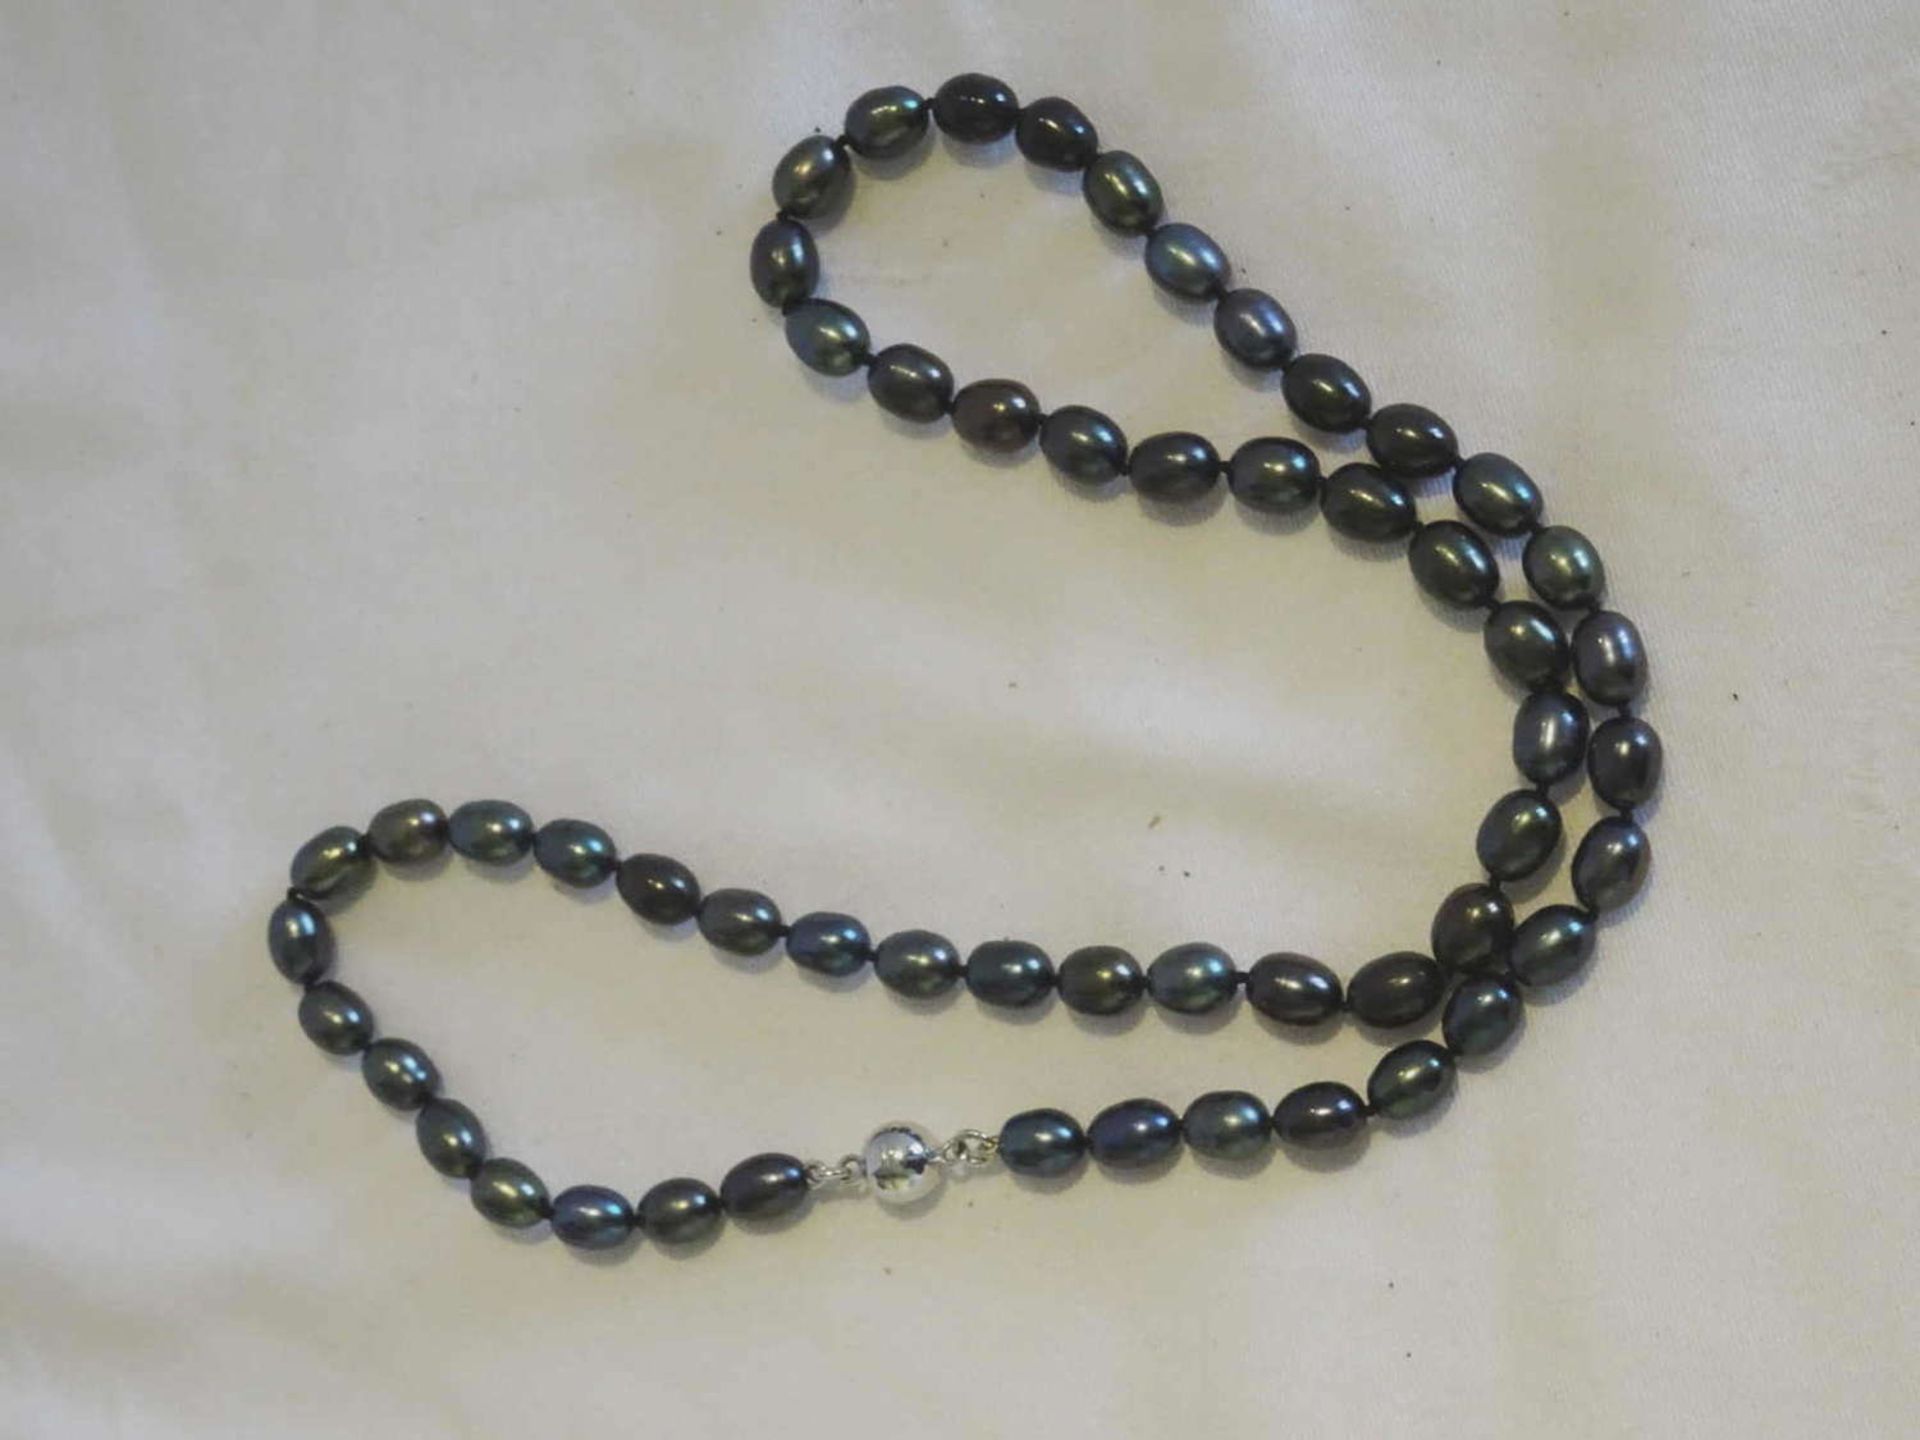 Real pearl necklace, iridescent. With magnetic closure. Length about 50 cm.